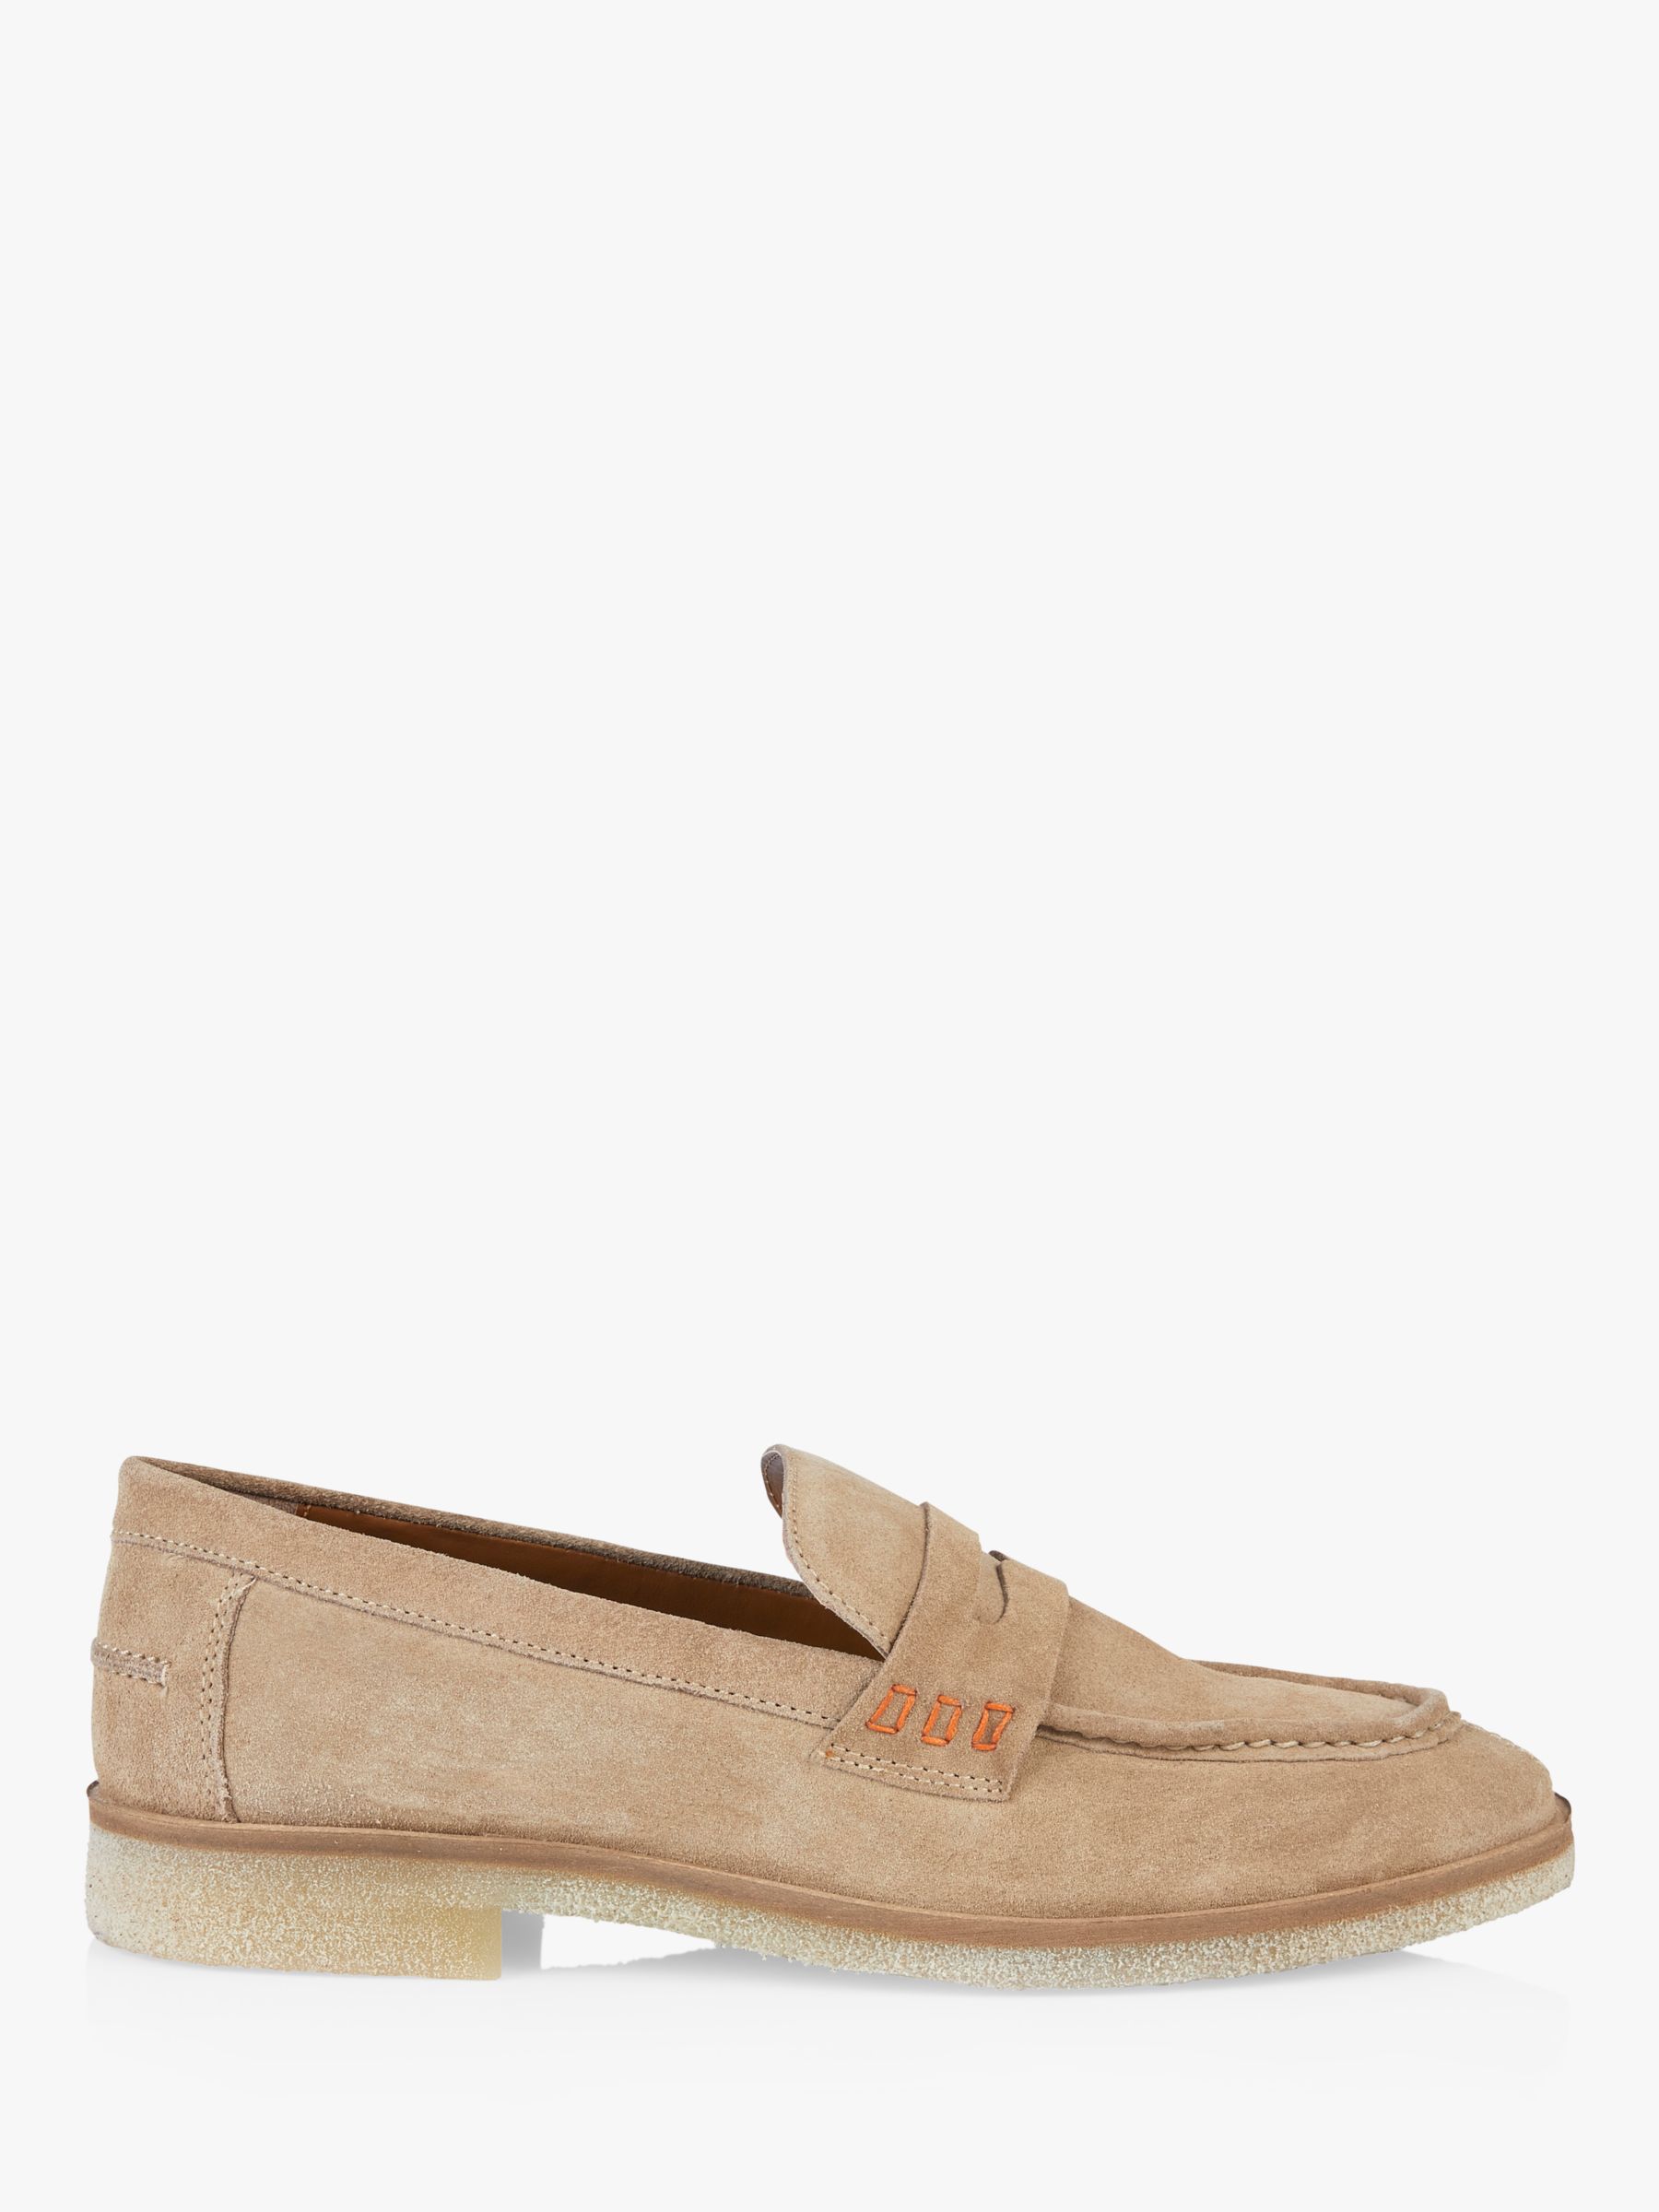 Silver Street London Morgan Suede Loafers, Sand at John Lewis & Partners